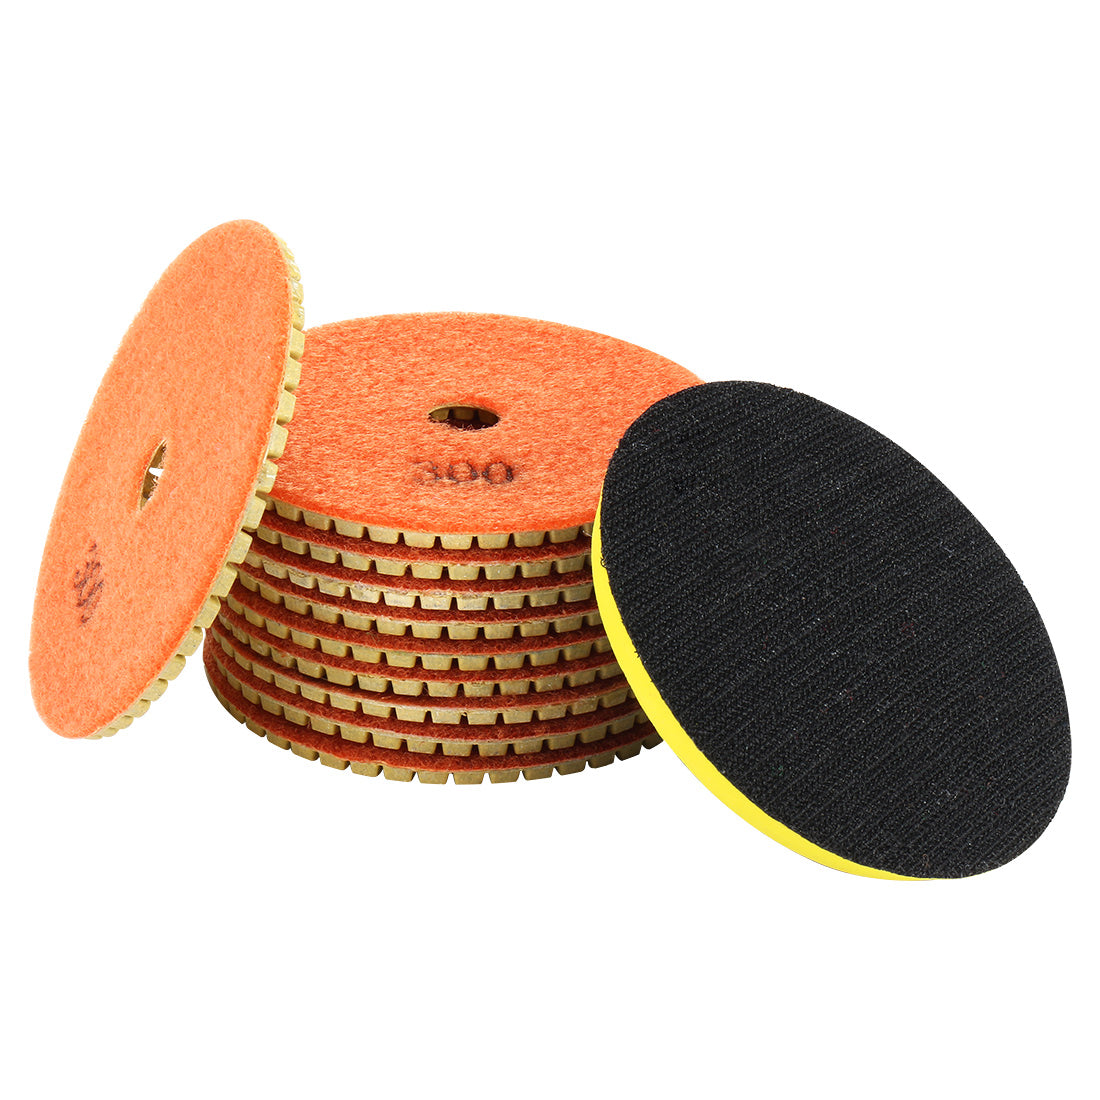 uxcell Uxcell 4" Diamond Wet Polishing Pad Disc Grit 300 10pcs for Granite Concrete Marble